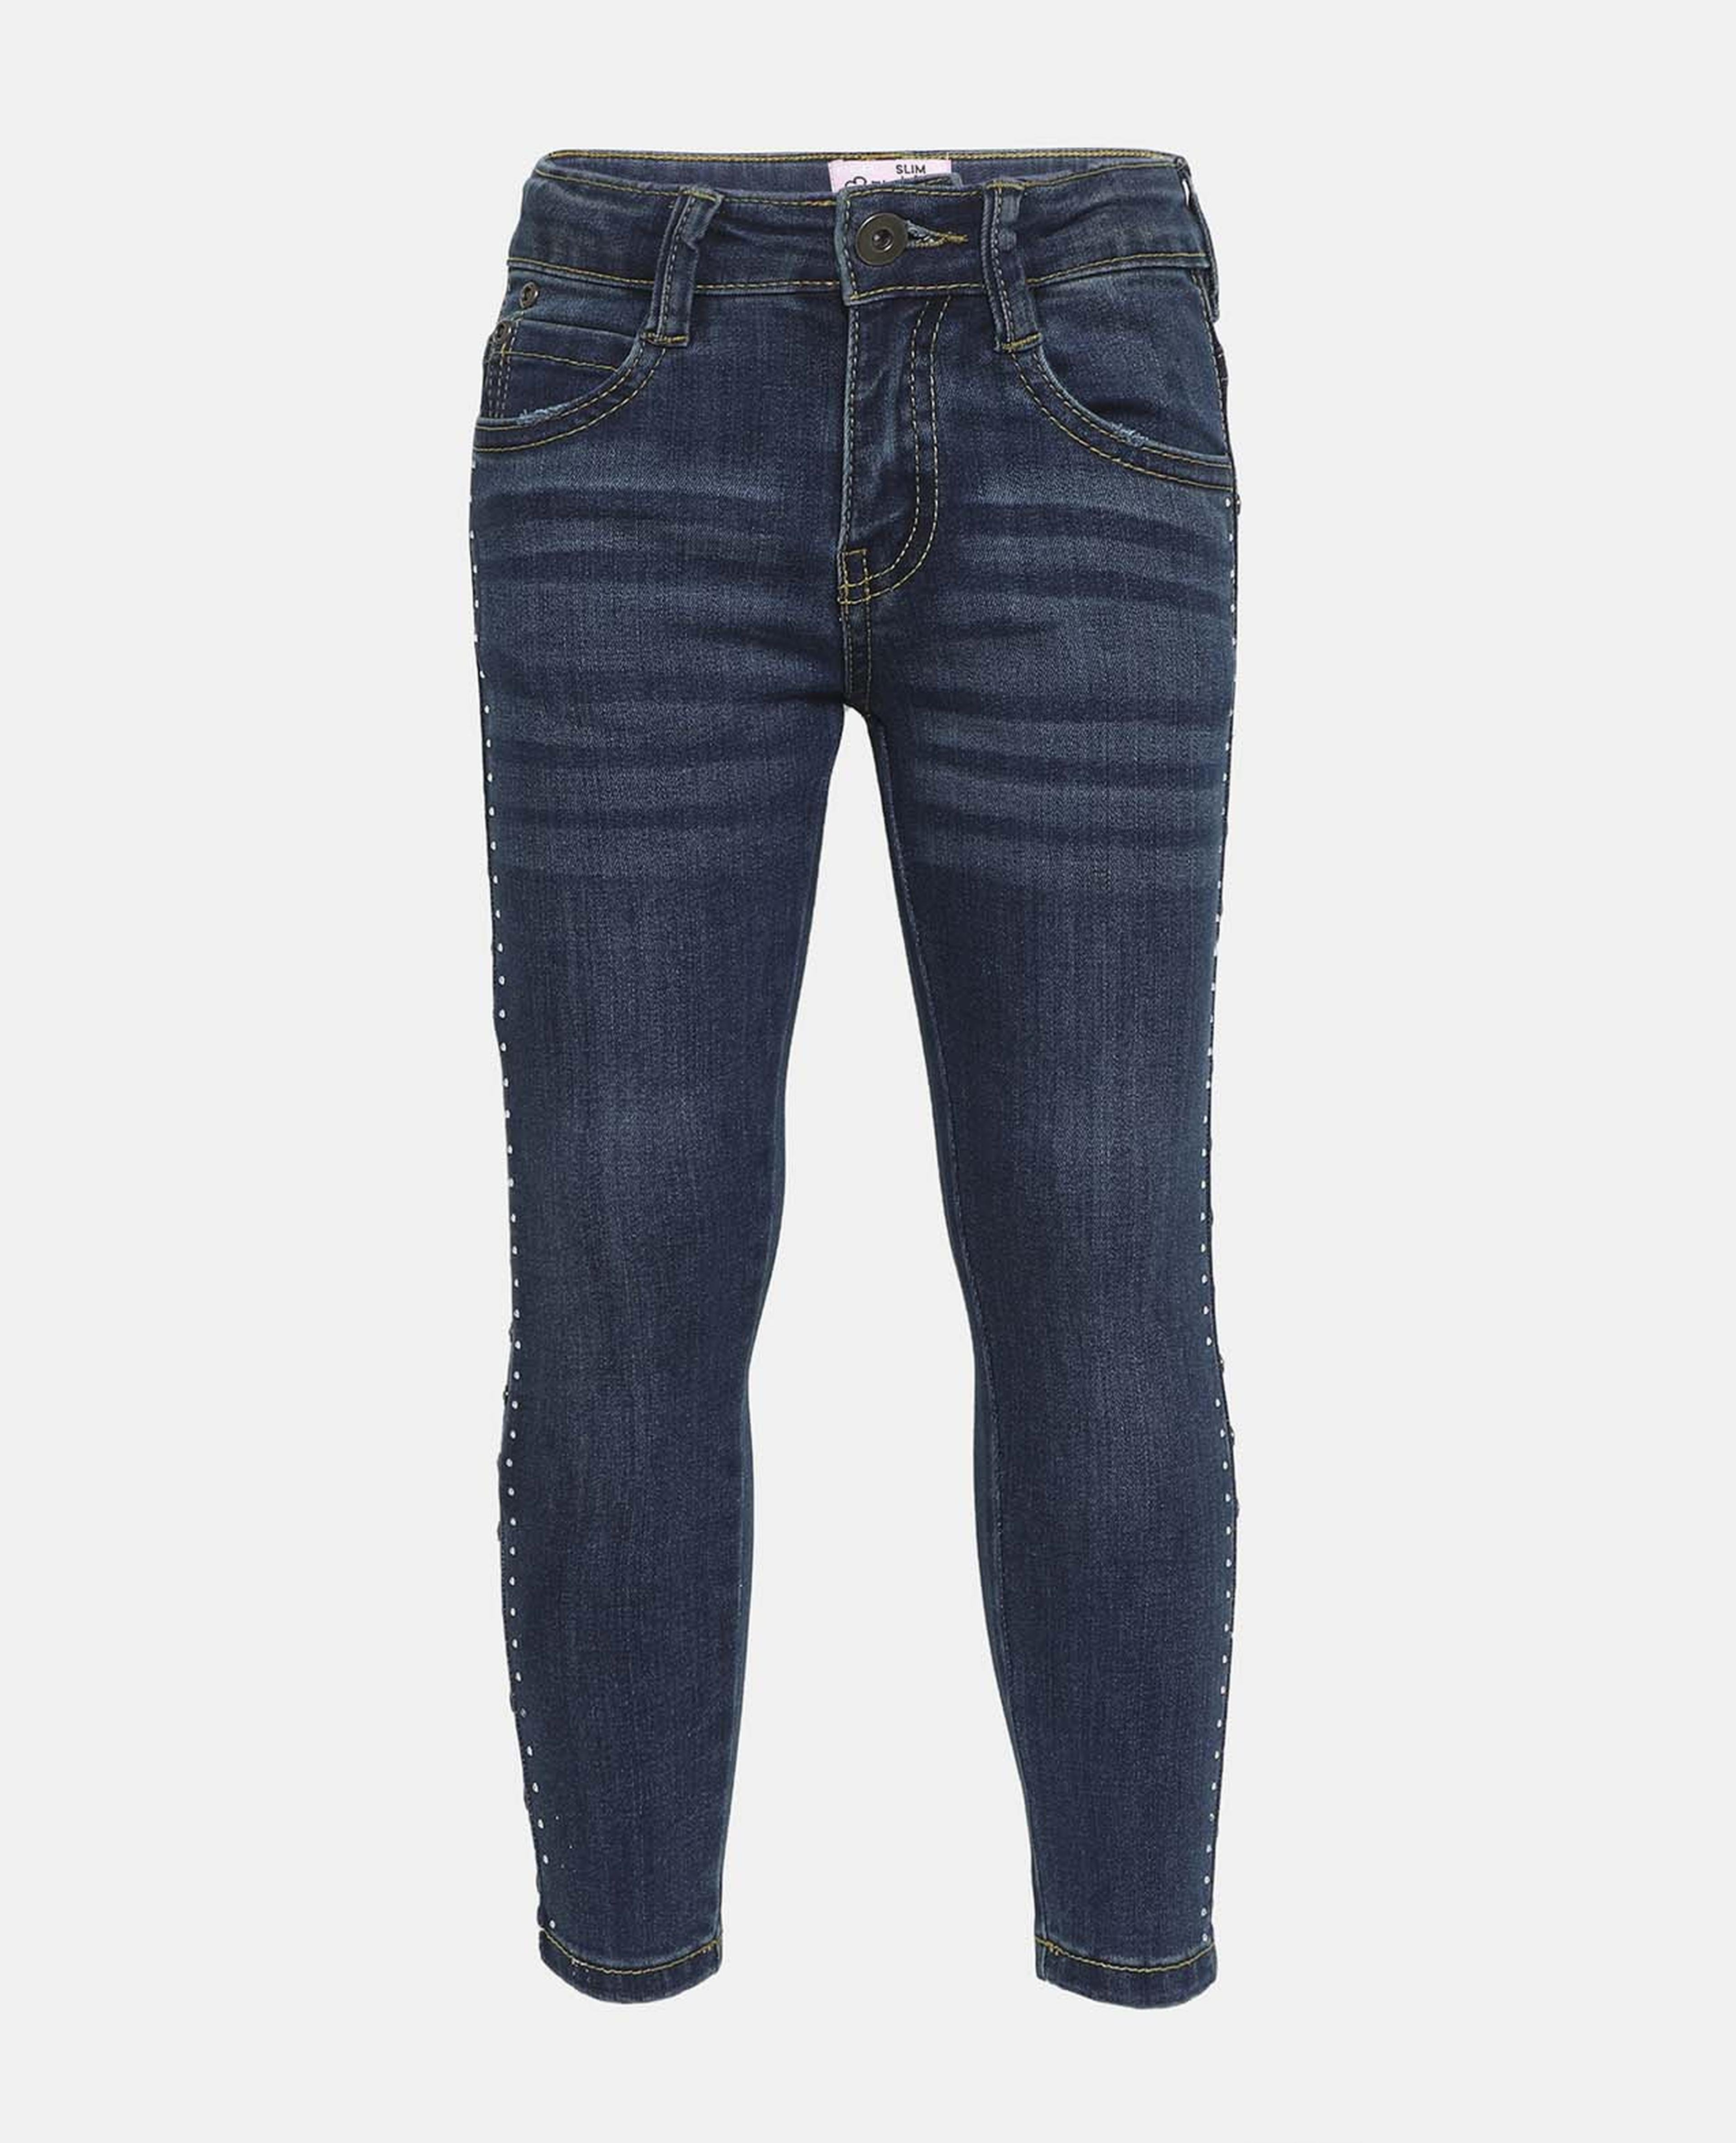 Blue Patterned Straight Jeans